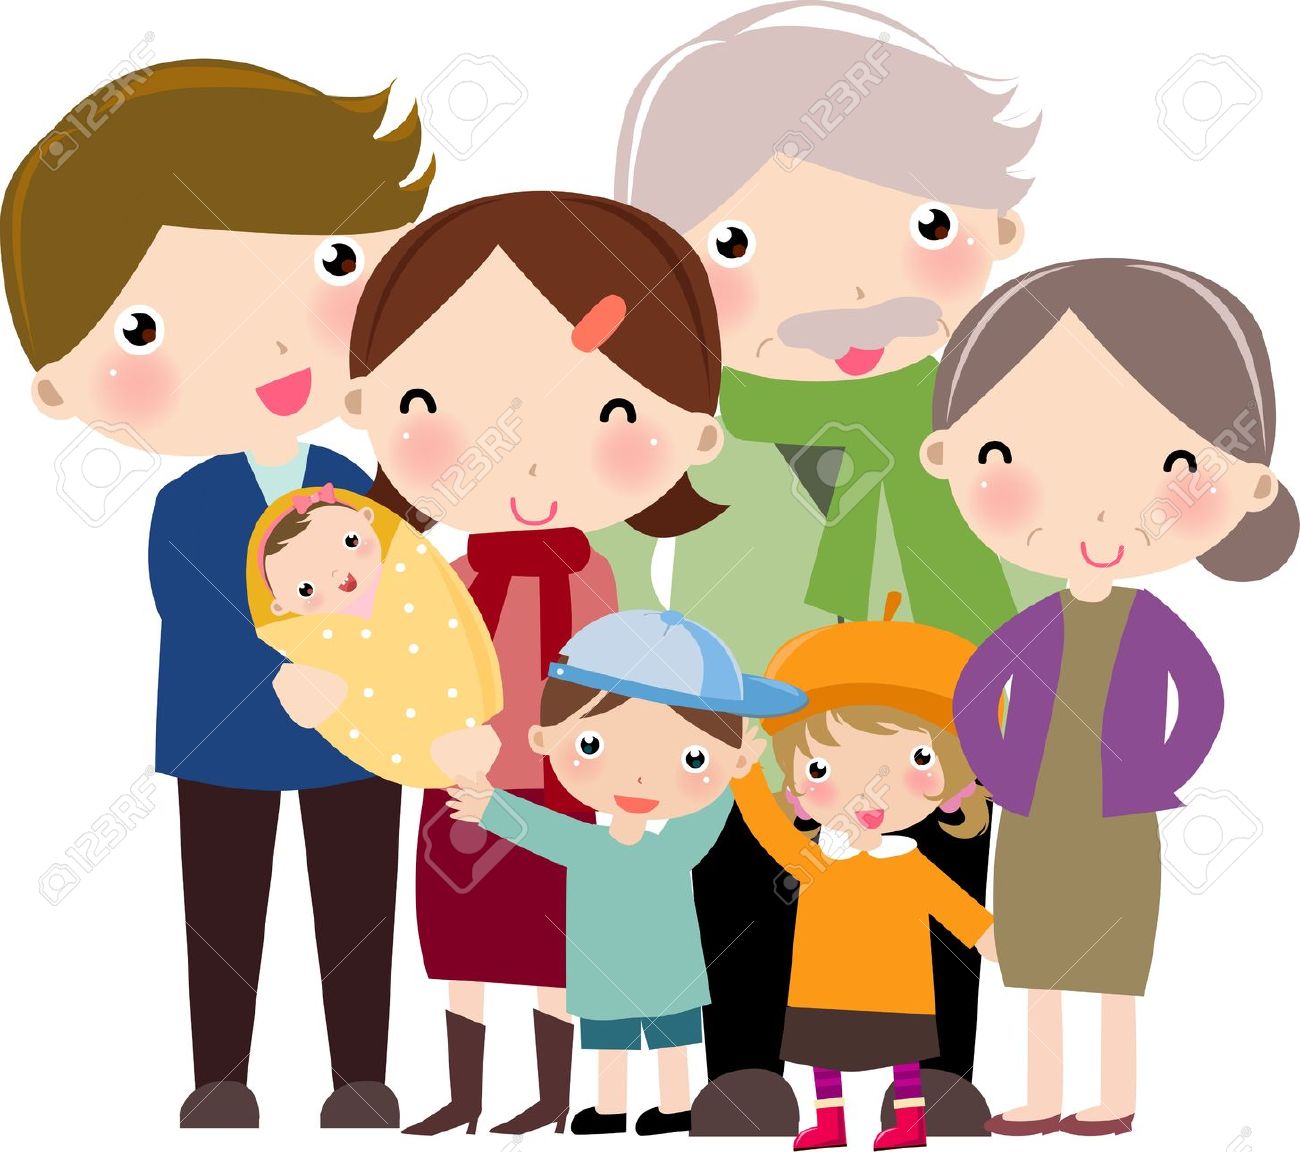 clipart family picture - photo #32